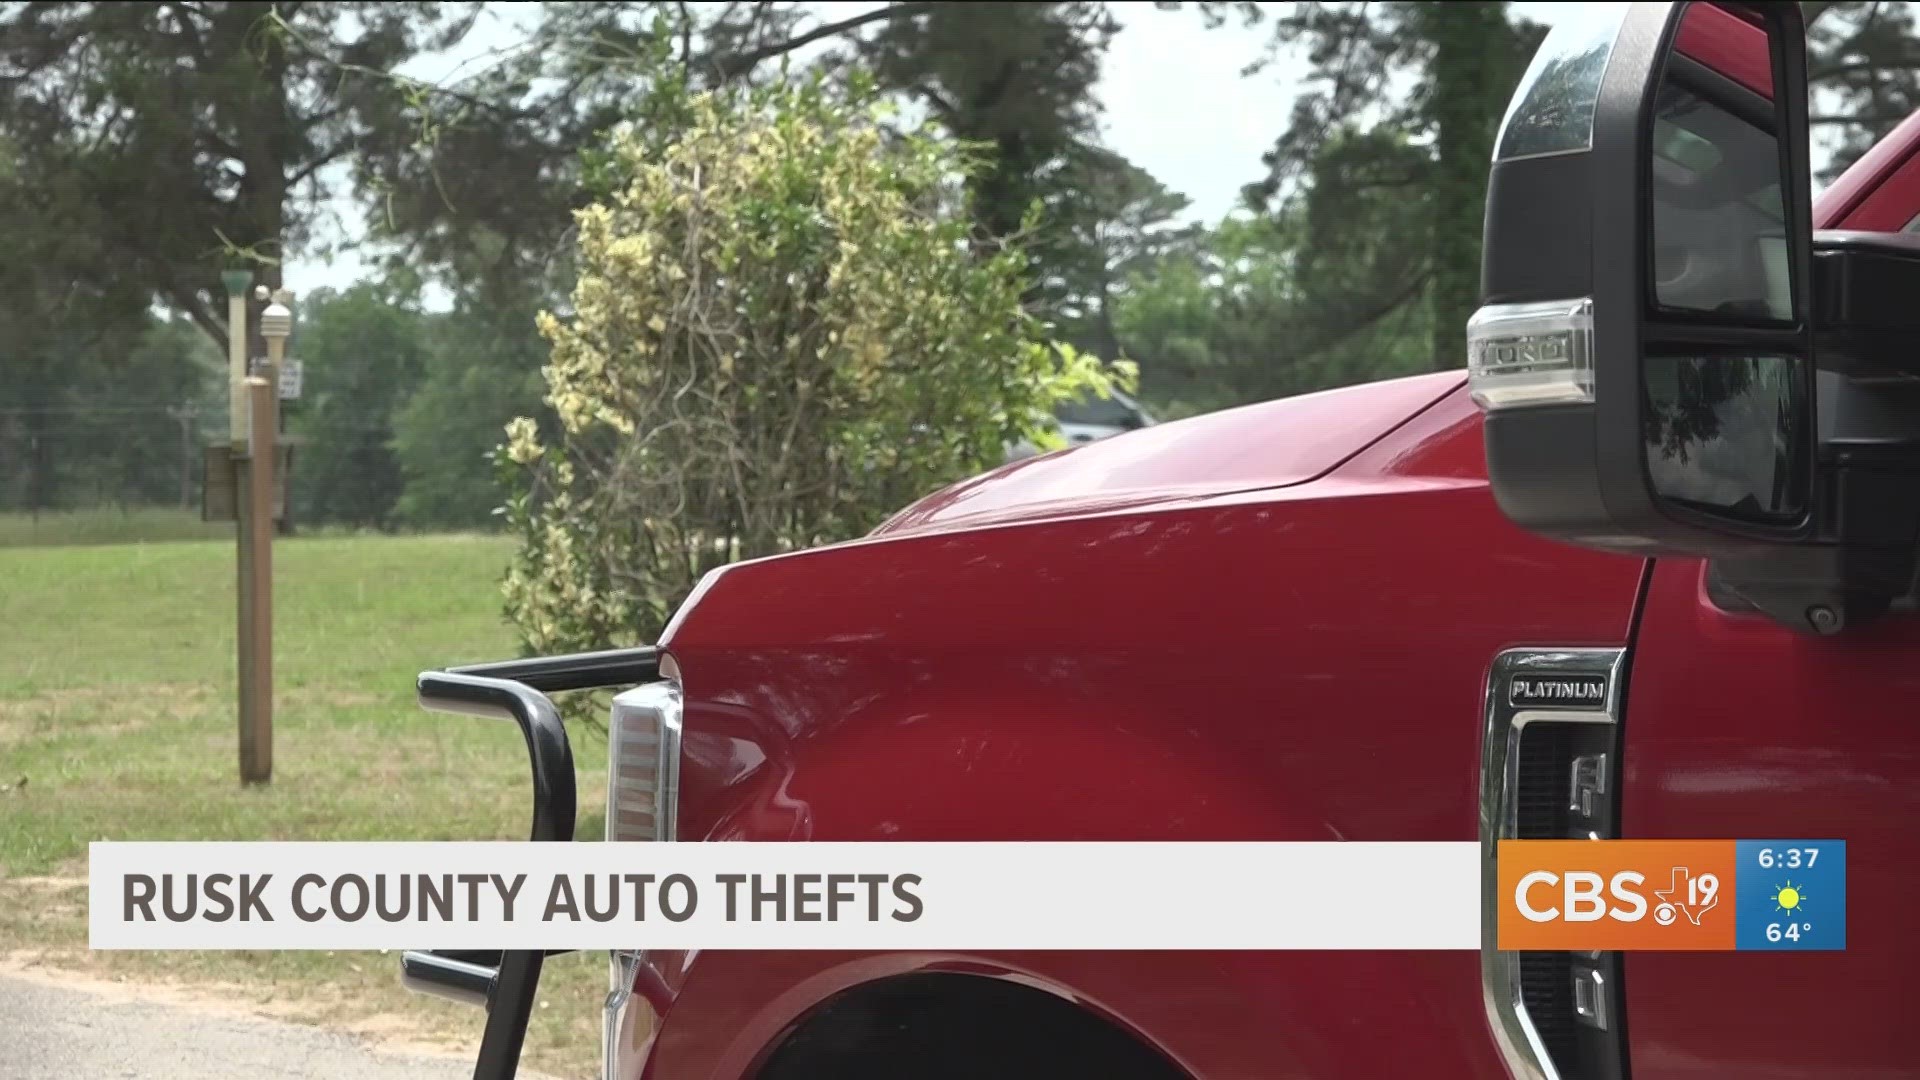 A series of vehicle thefts has taken place across Rusk County